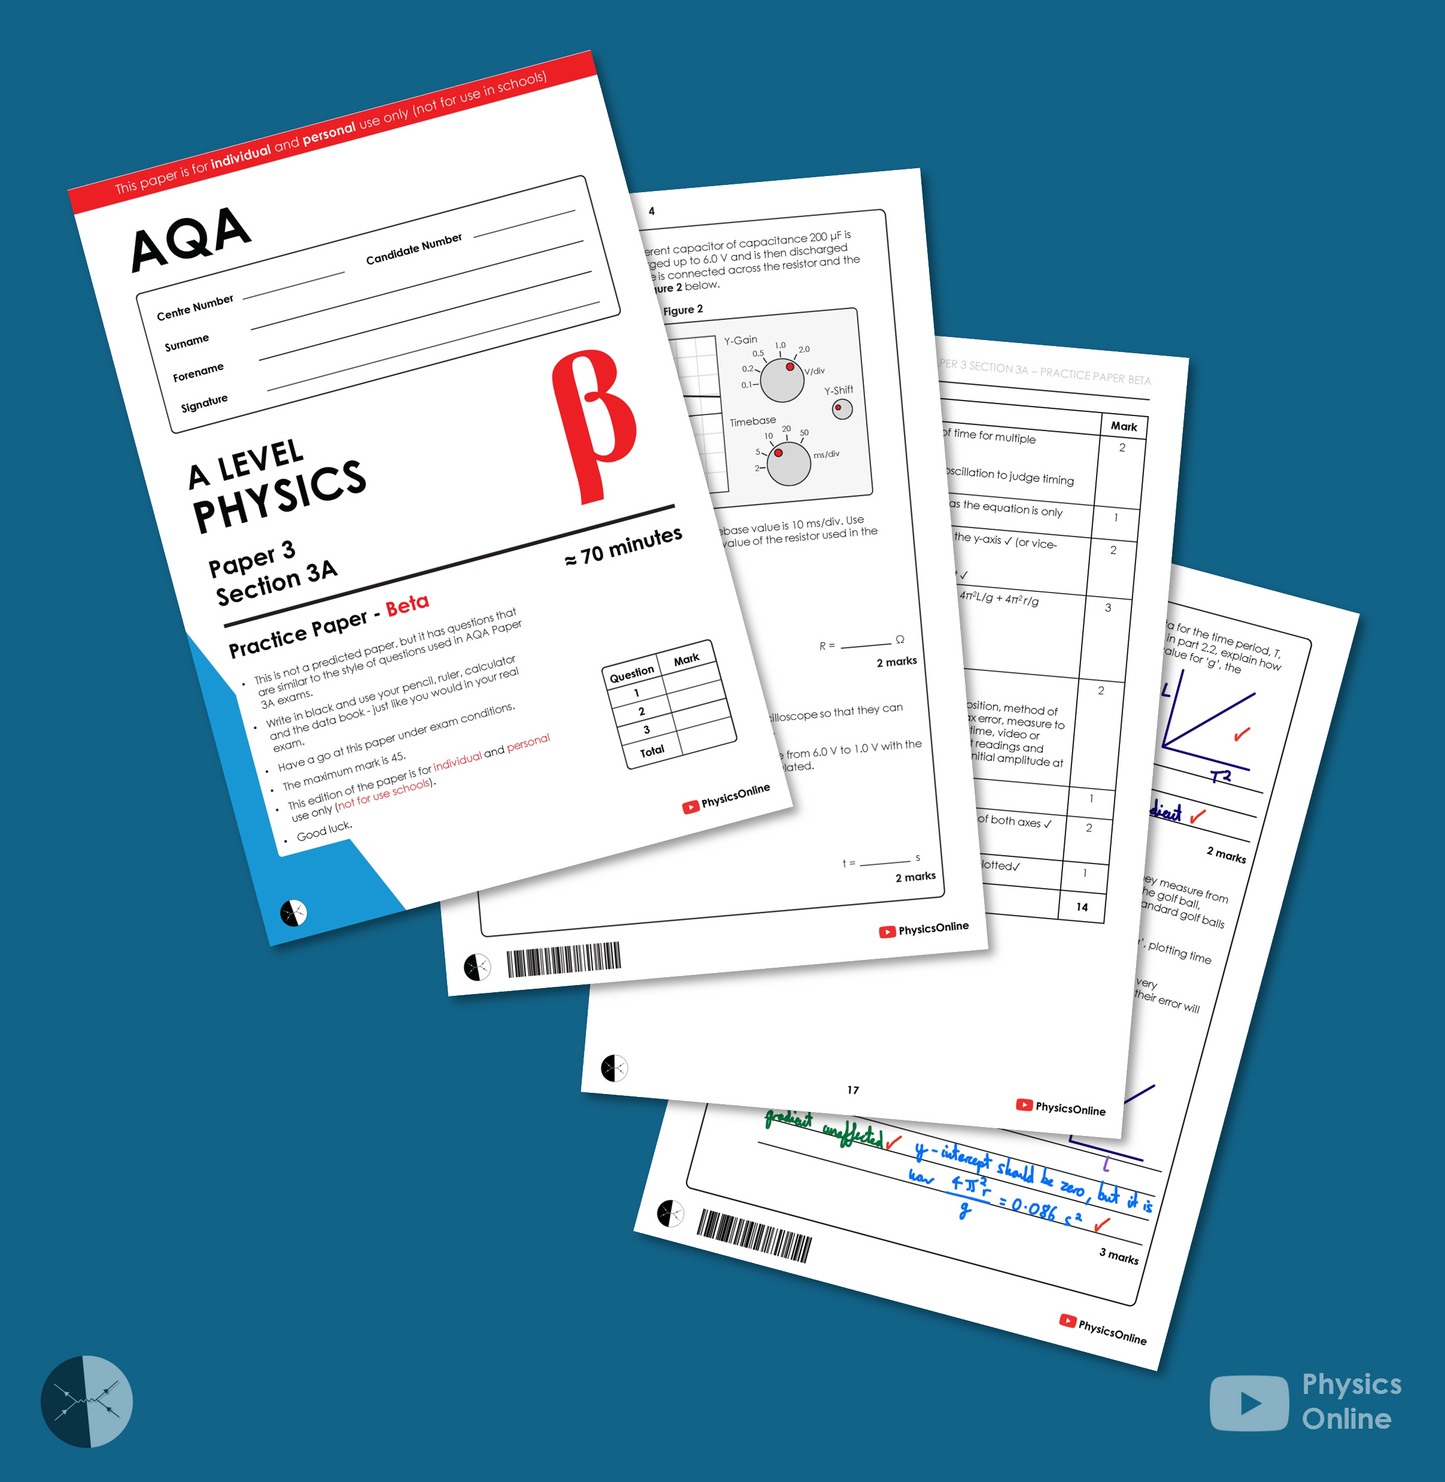 AQA Practice Paper | 3A - Beta | Individual Issue | A Level Physics